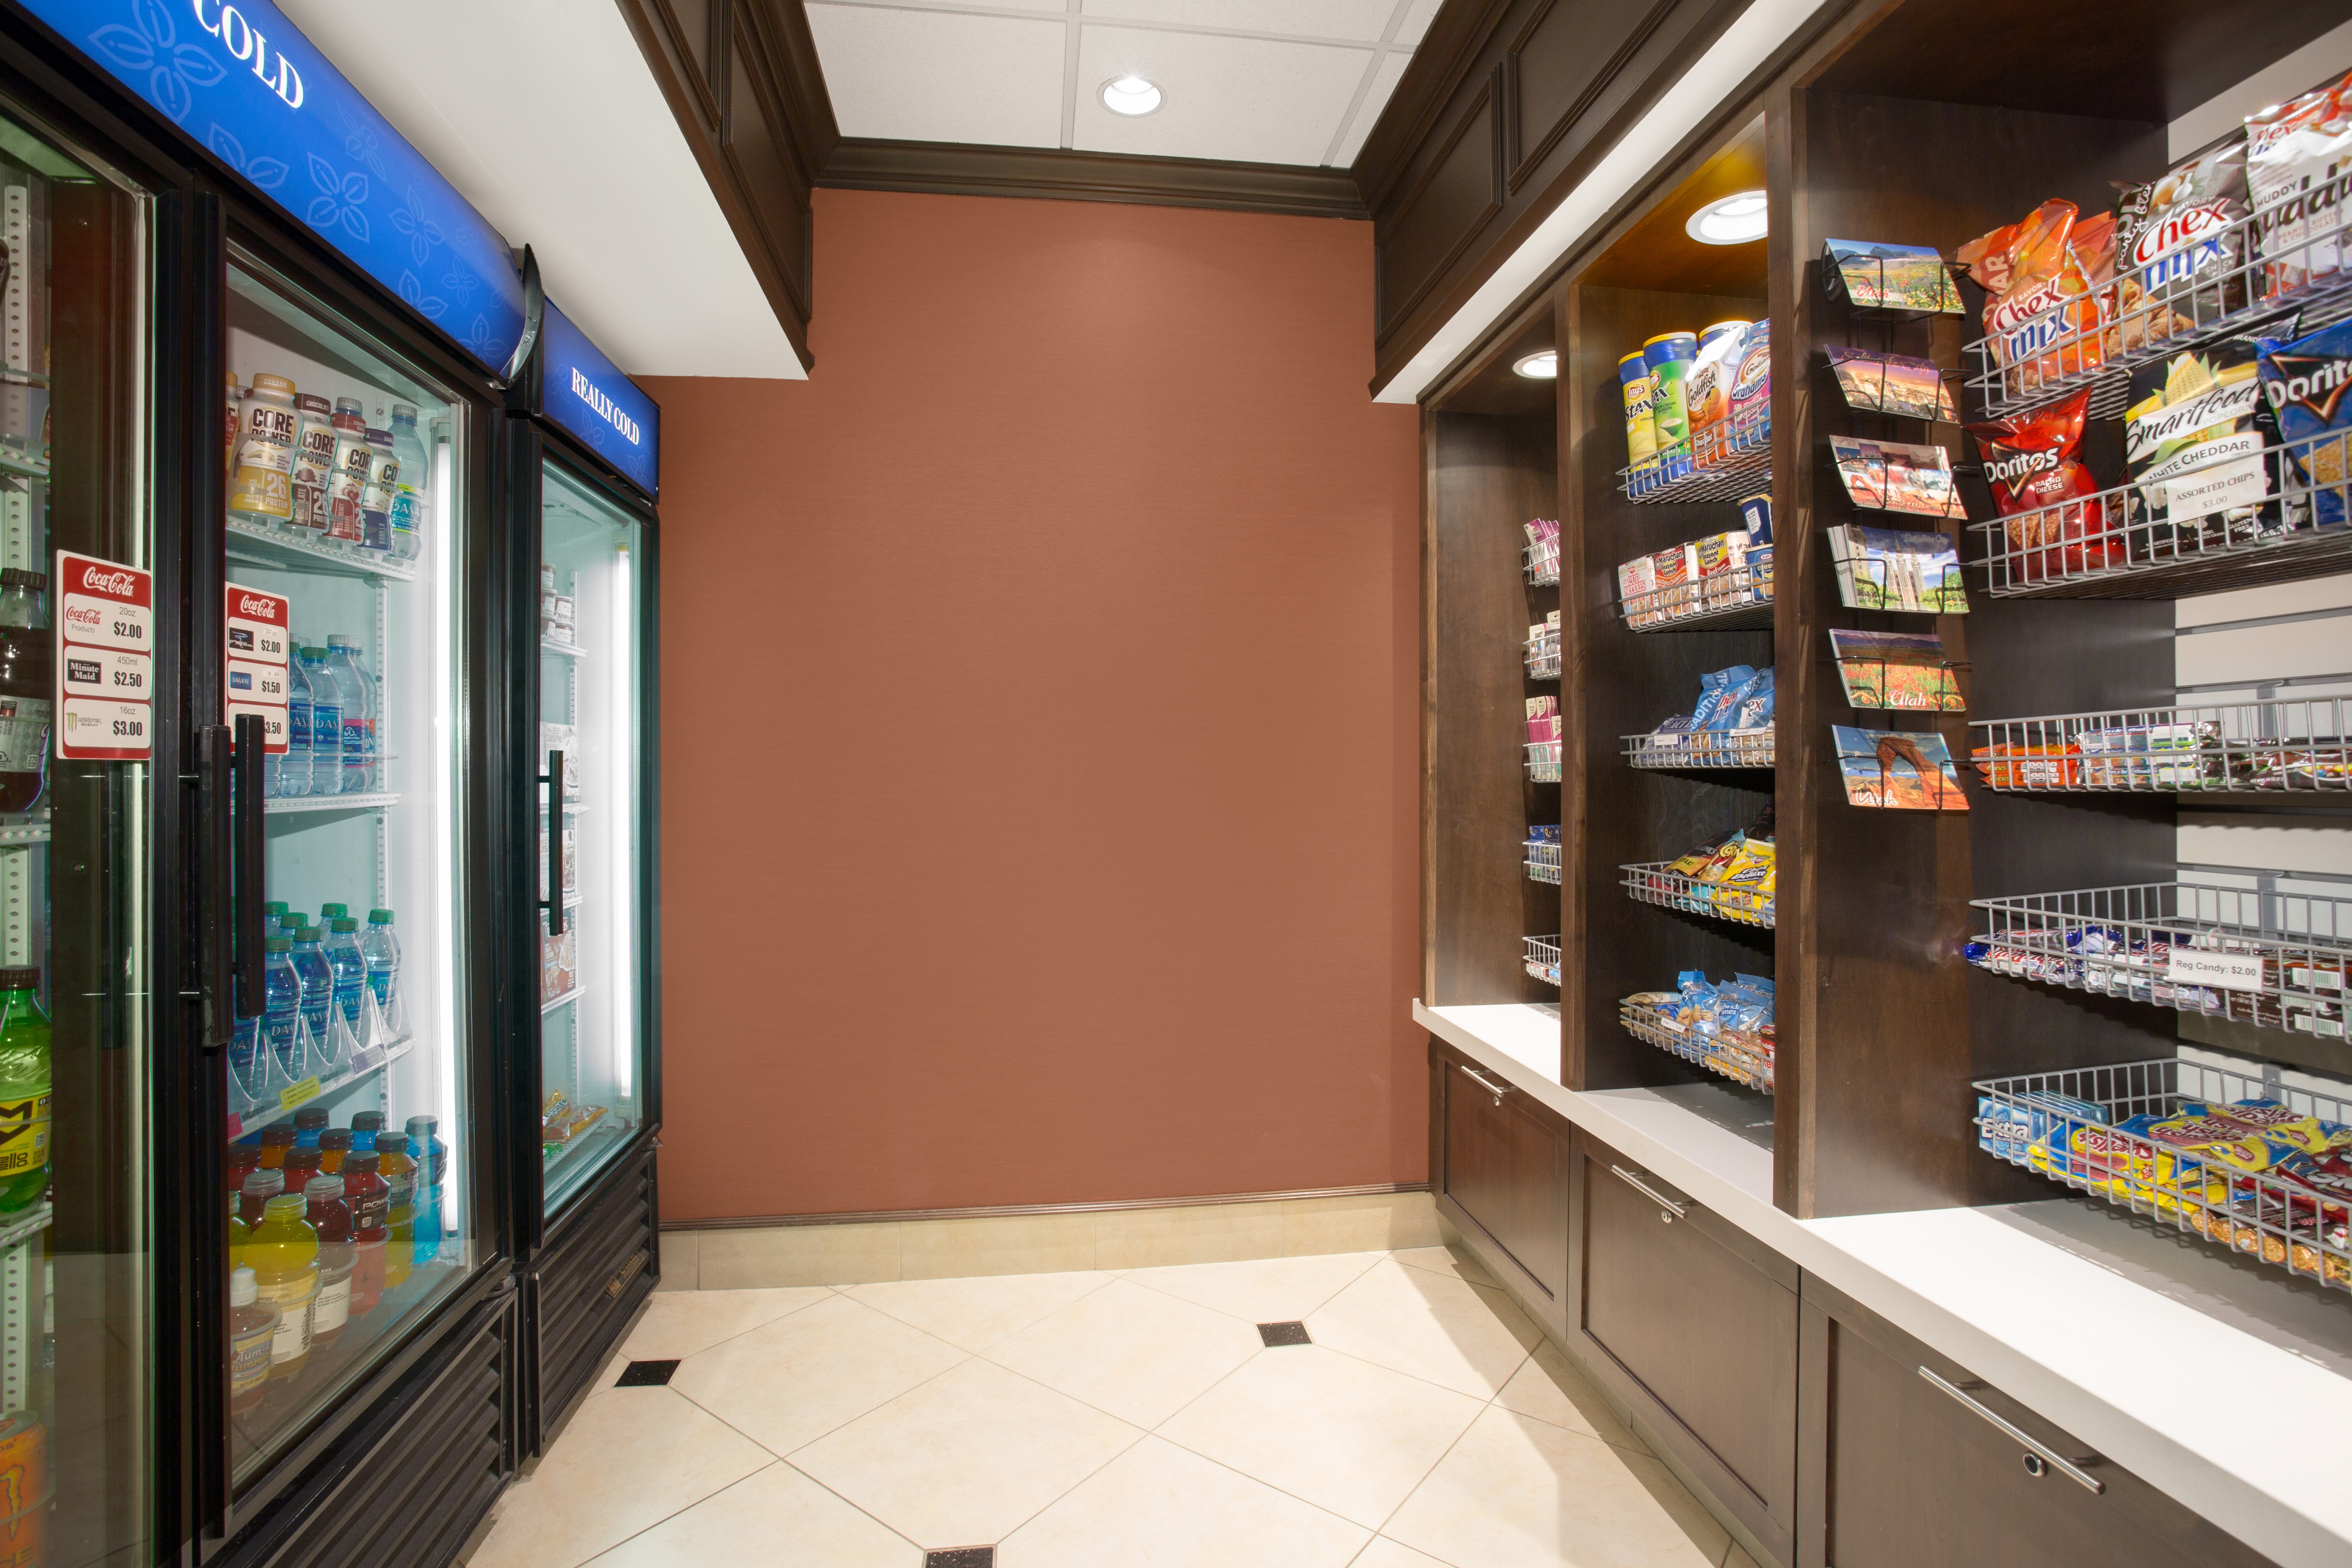 Snack Shelves and Refrigerator in Convenience Shop